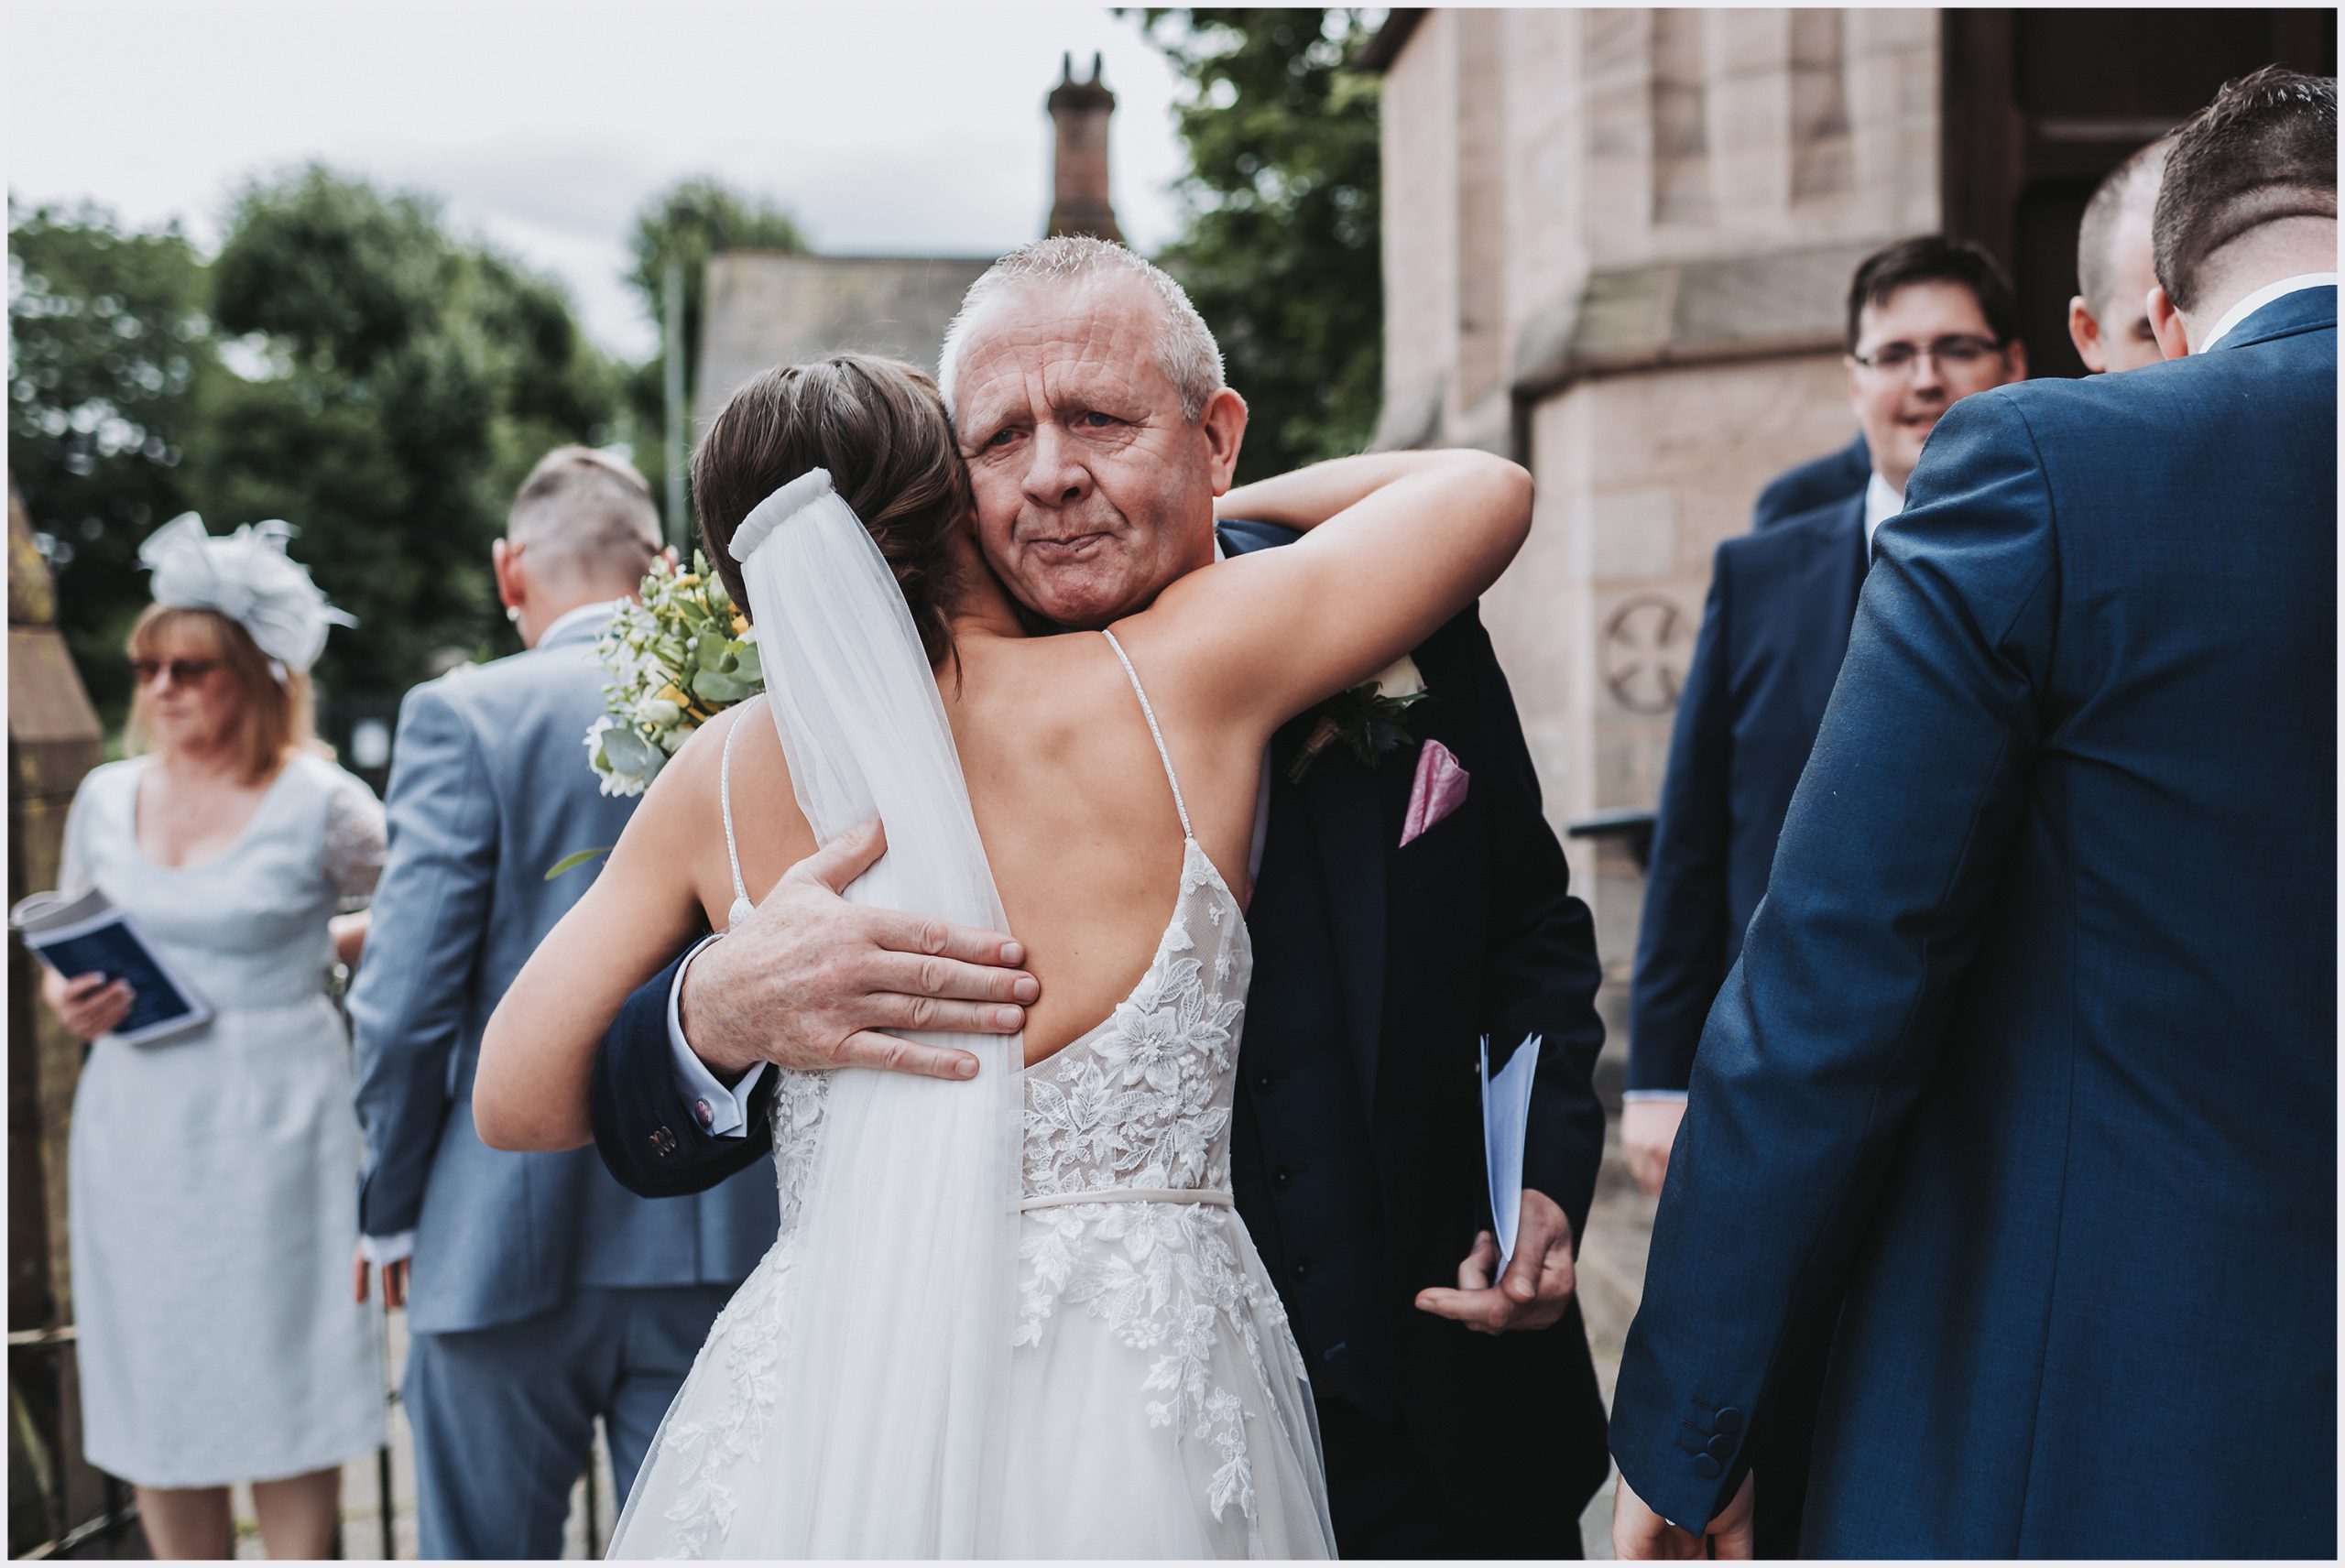 A guest emotionally hugs the bride after leaving the church.  Image captured by Cheshire wedding photographer Helena Jayne Photography